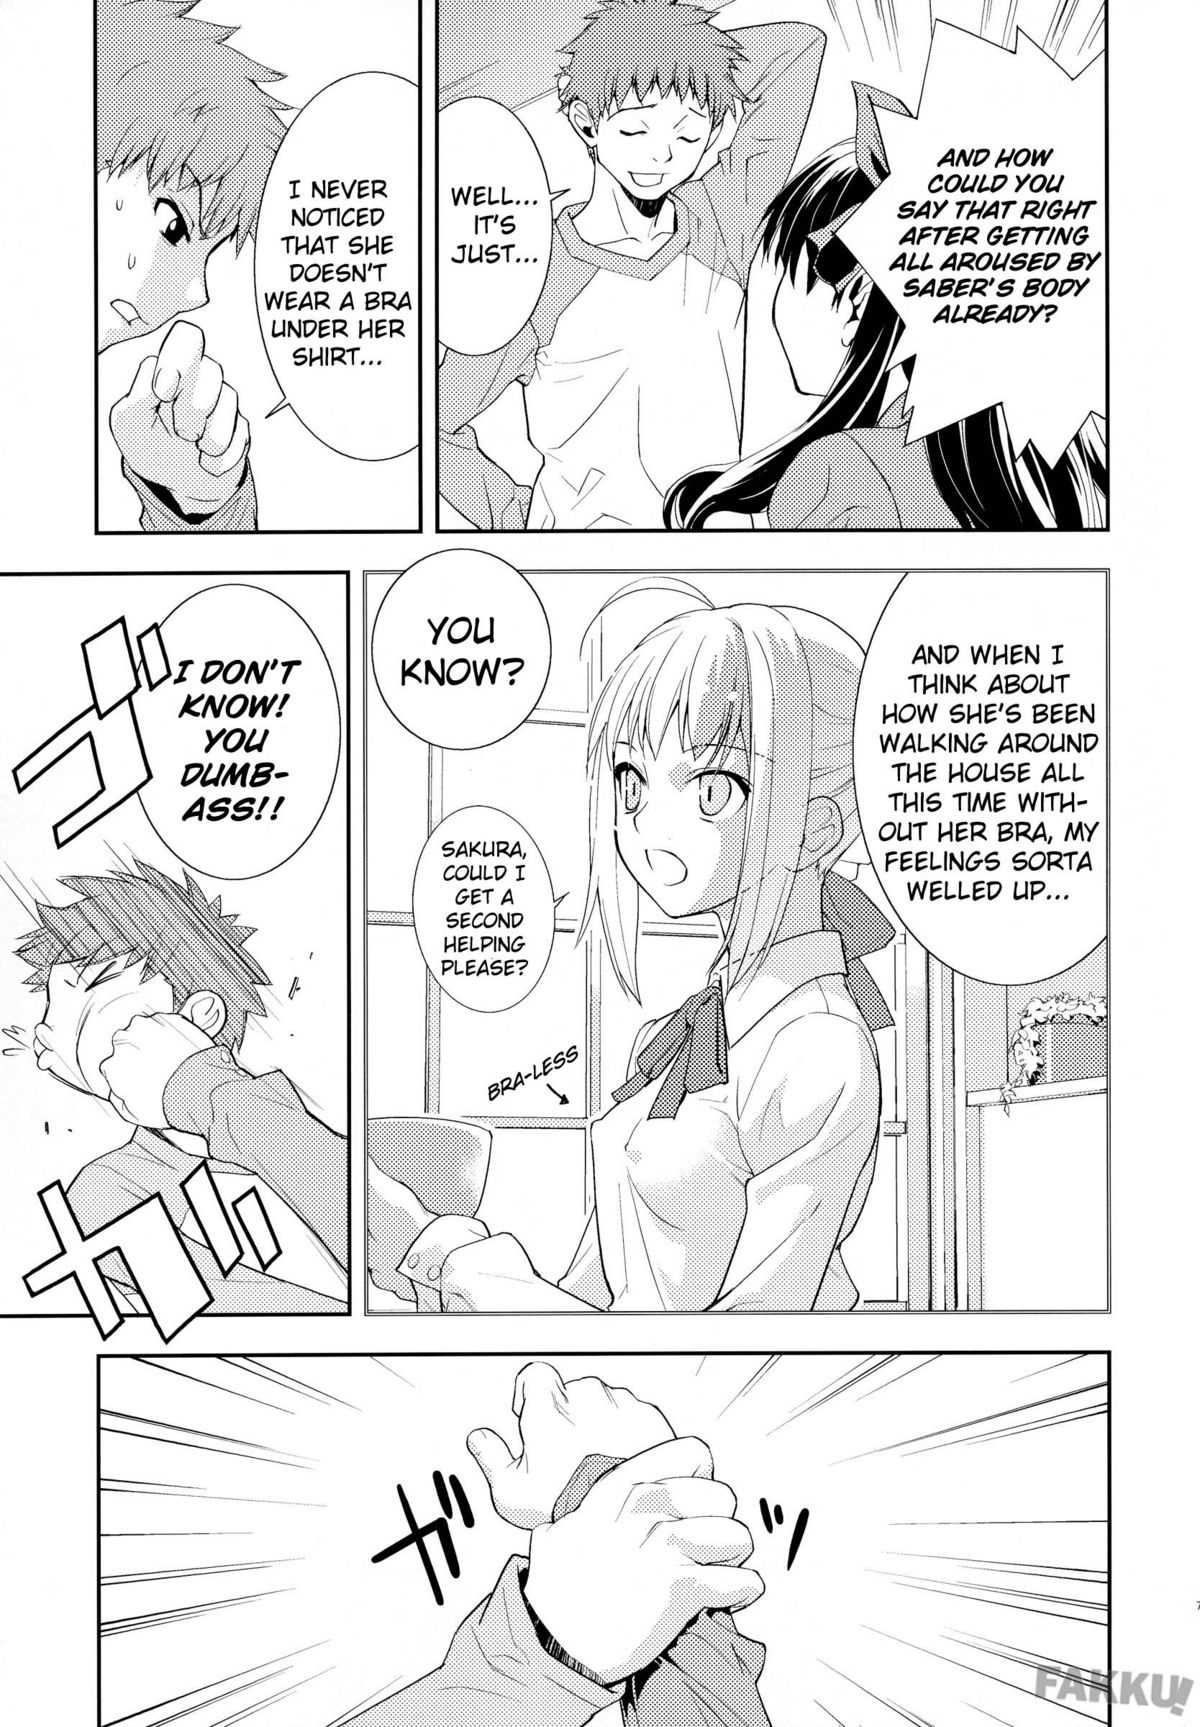 [Hapoi-Dokoro] Claim (Fate Stay Night) [ENG] 